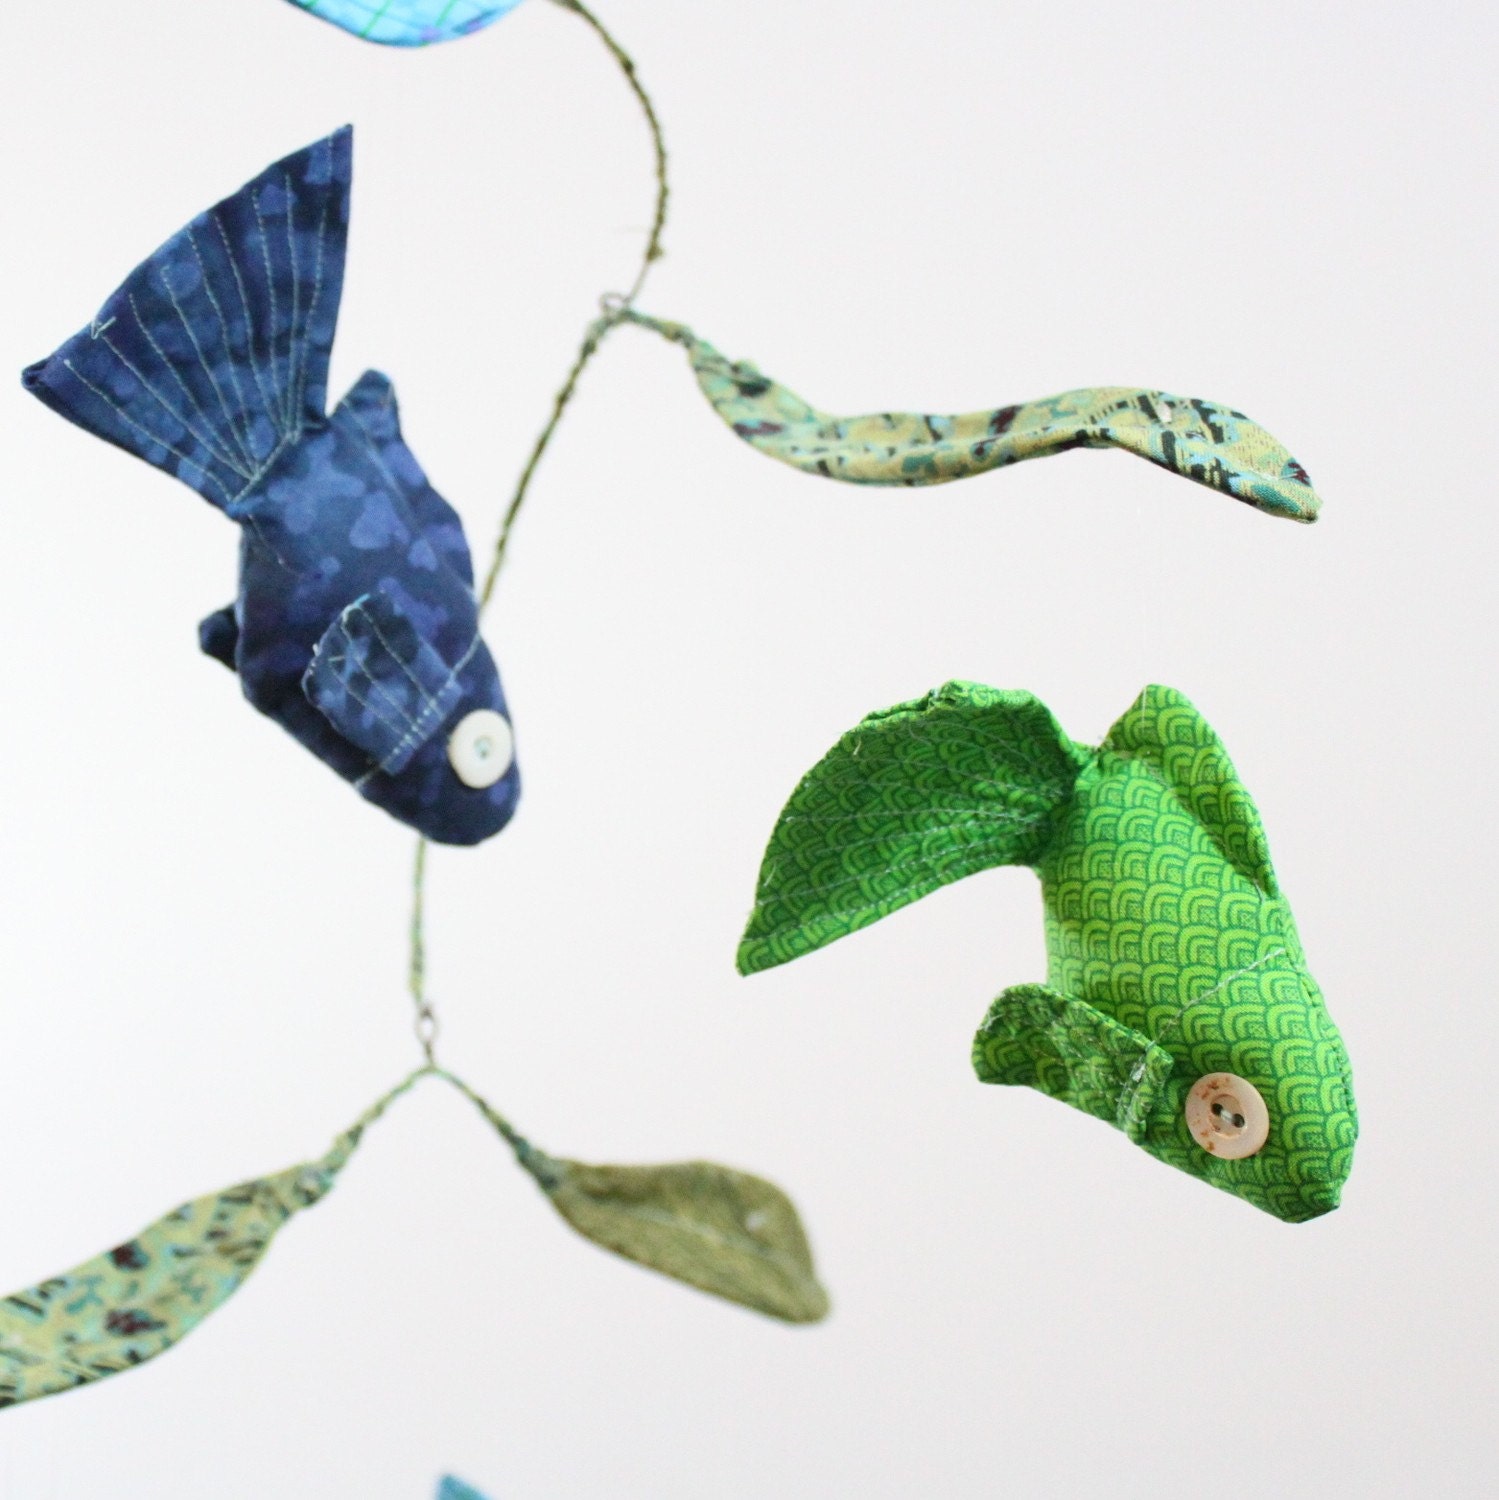 Fabric Fish Mobile - 4 goldfish swim along merrily - in navy blue, grass green, aqua, and teal